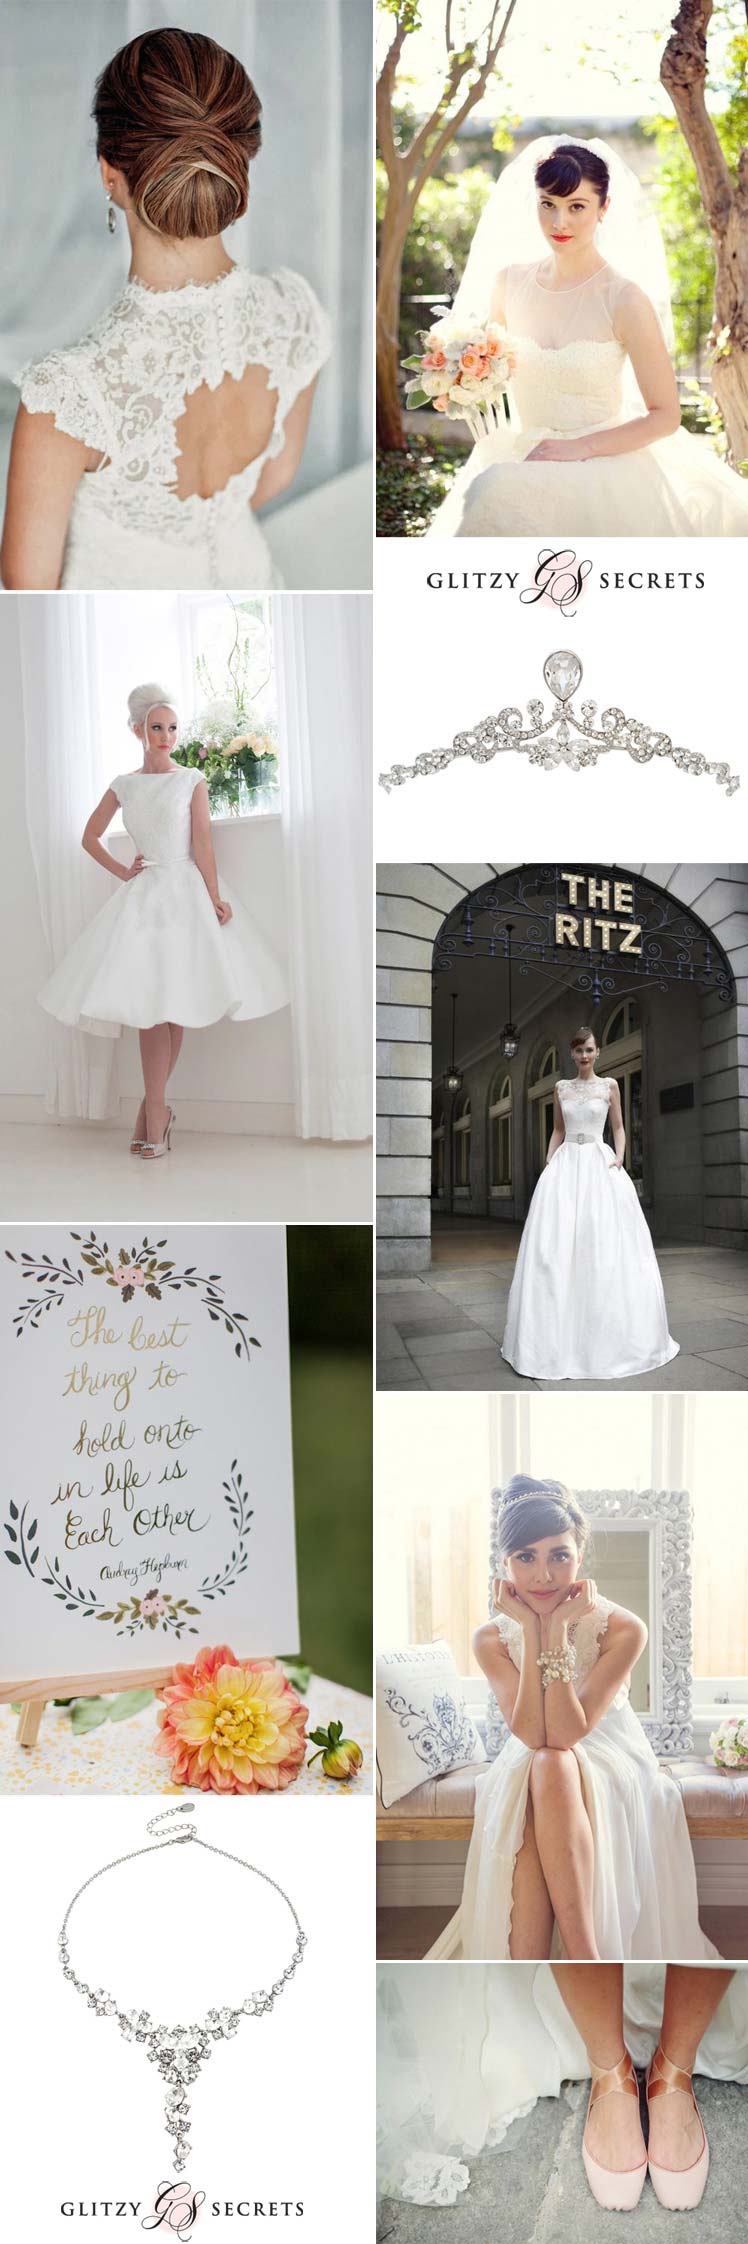 How to achieve Audrey Hepburn style on your wedding day